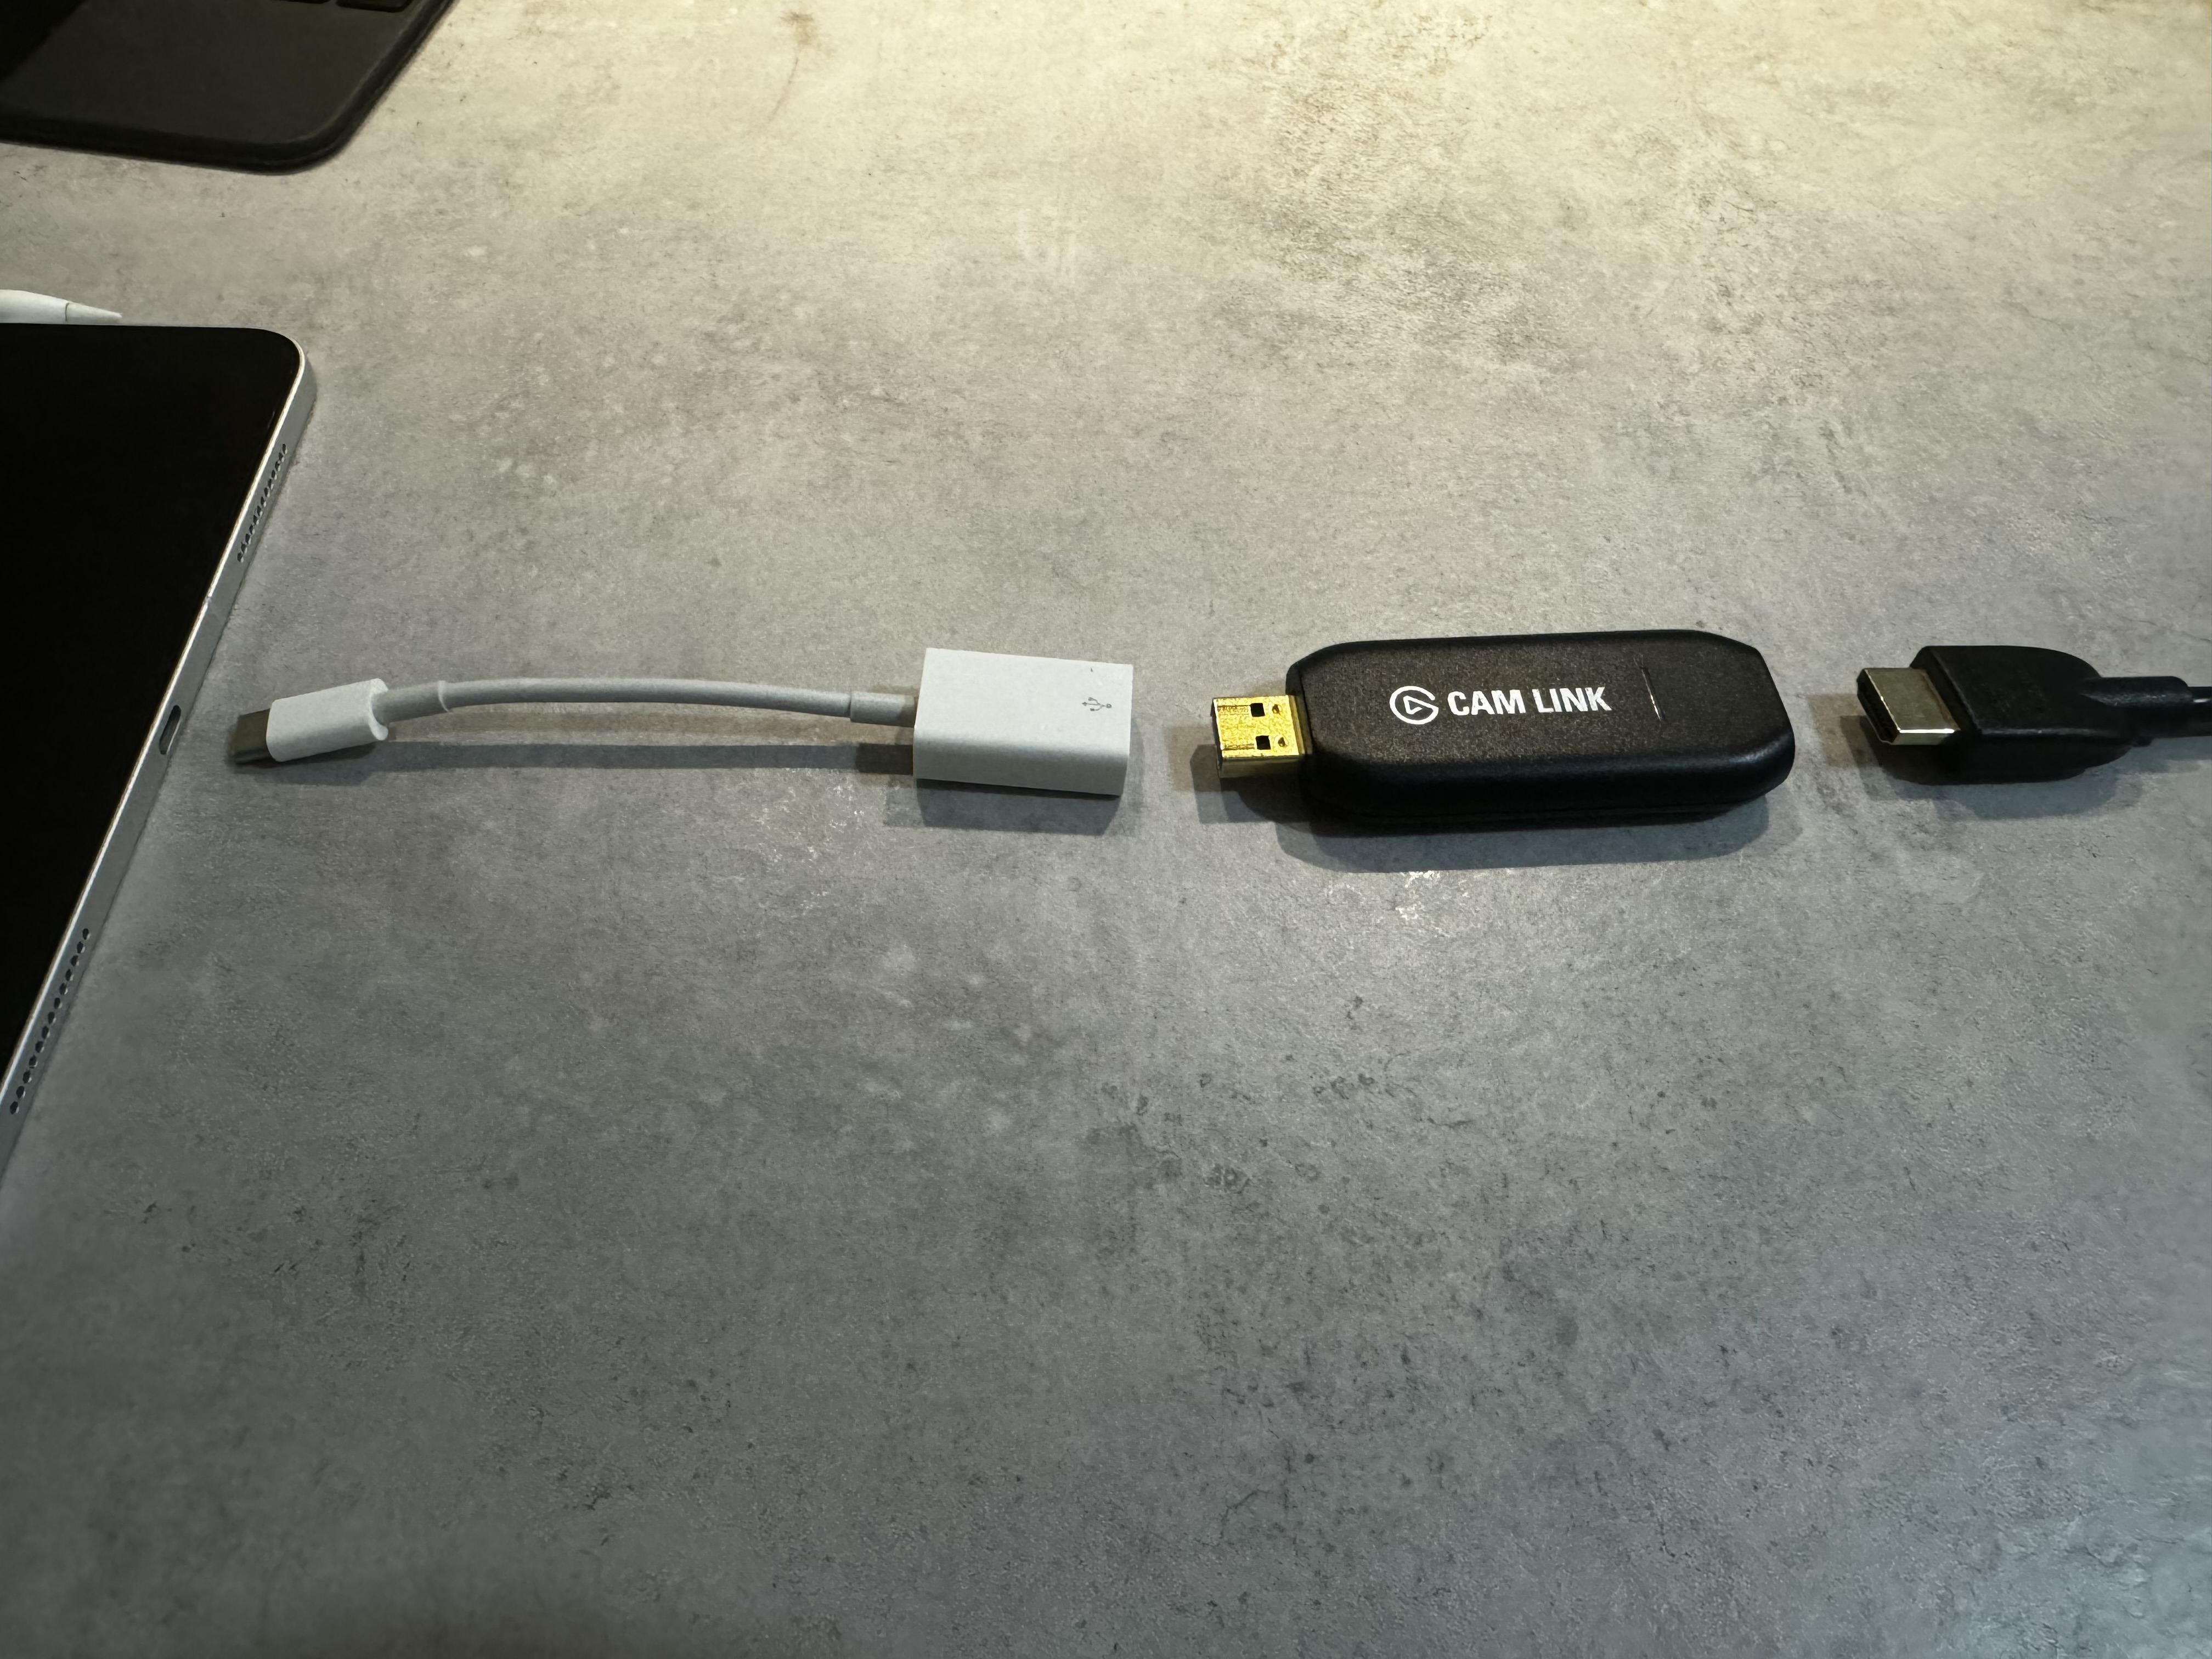 How to Eliminate USB HDMI Capture Devices like the Elgato Camlink